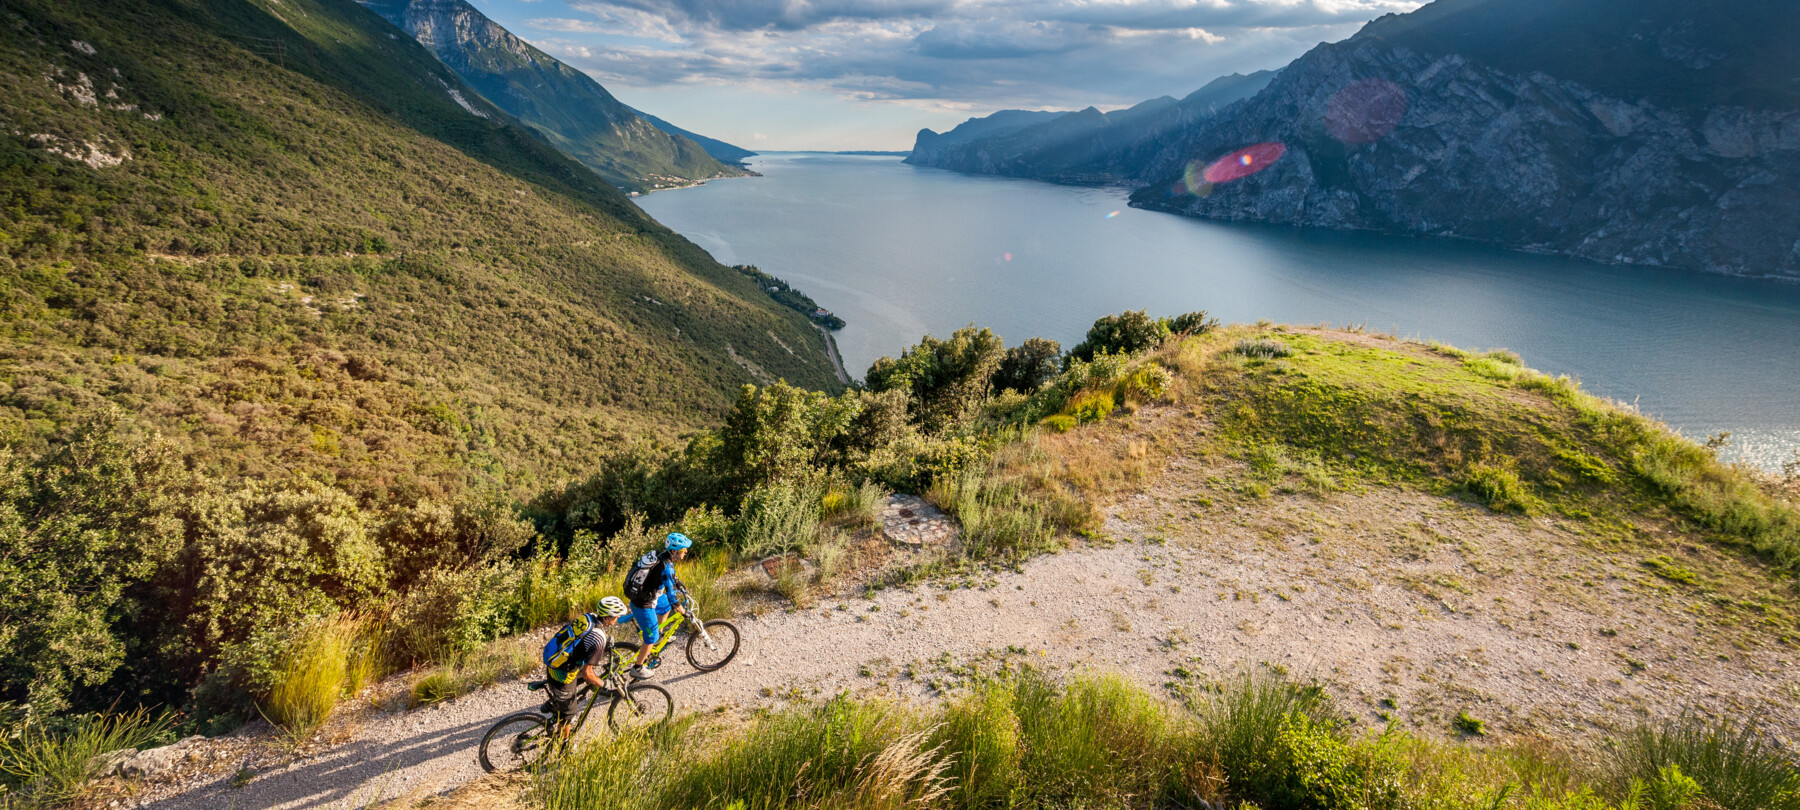 The Do-Ga Cycling Route: from the Dolomites to Lake Garda by bike